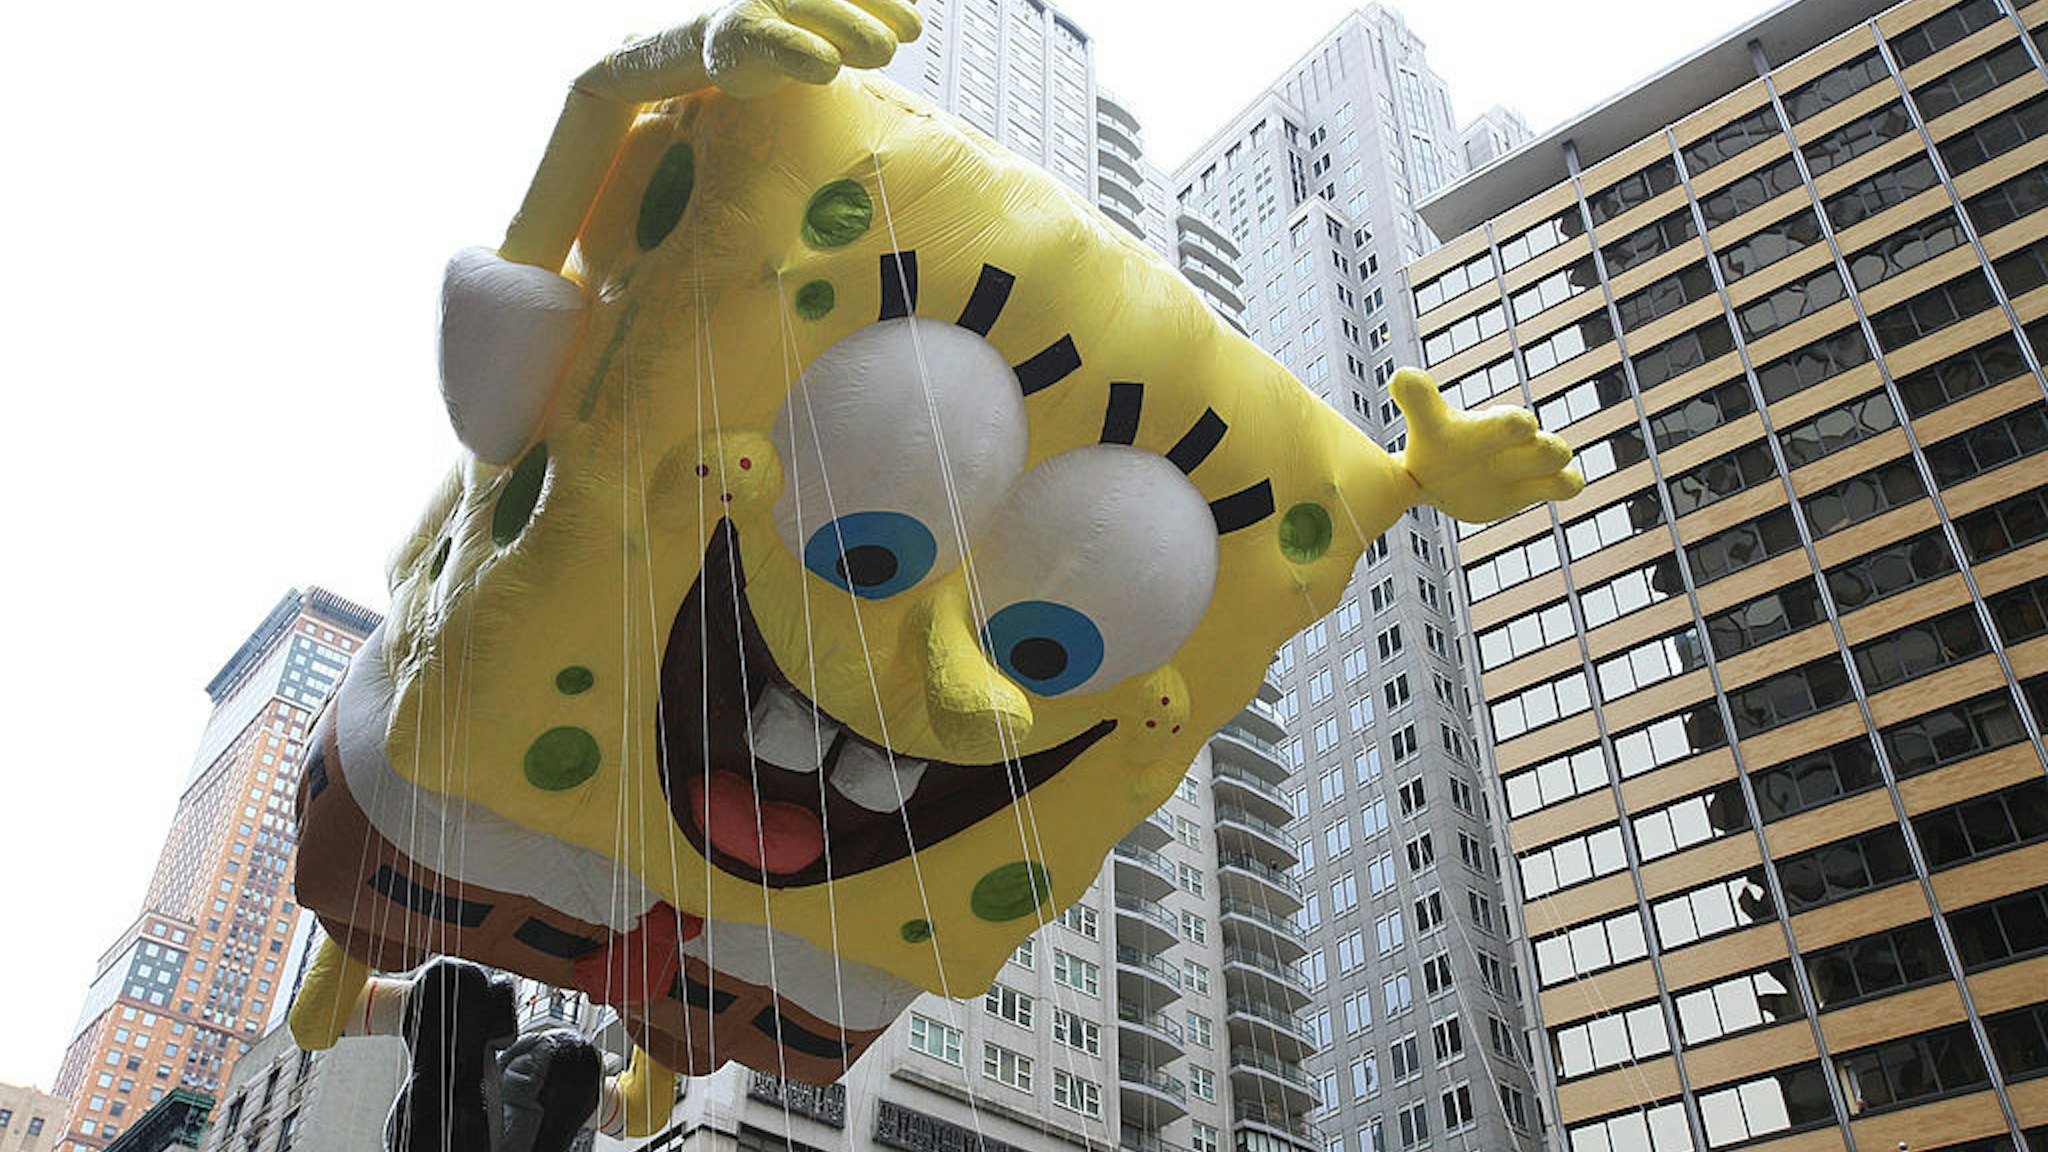 Nickelodeon's Spongebob Squarepants floats down Broadway for the 84th annual Macy's Thanksgiving Day Parade on November 25, 2010 in New York City